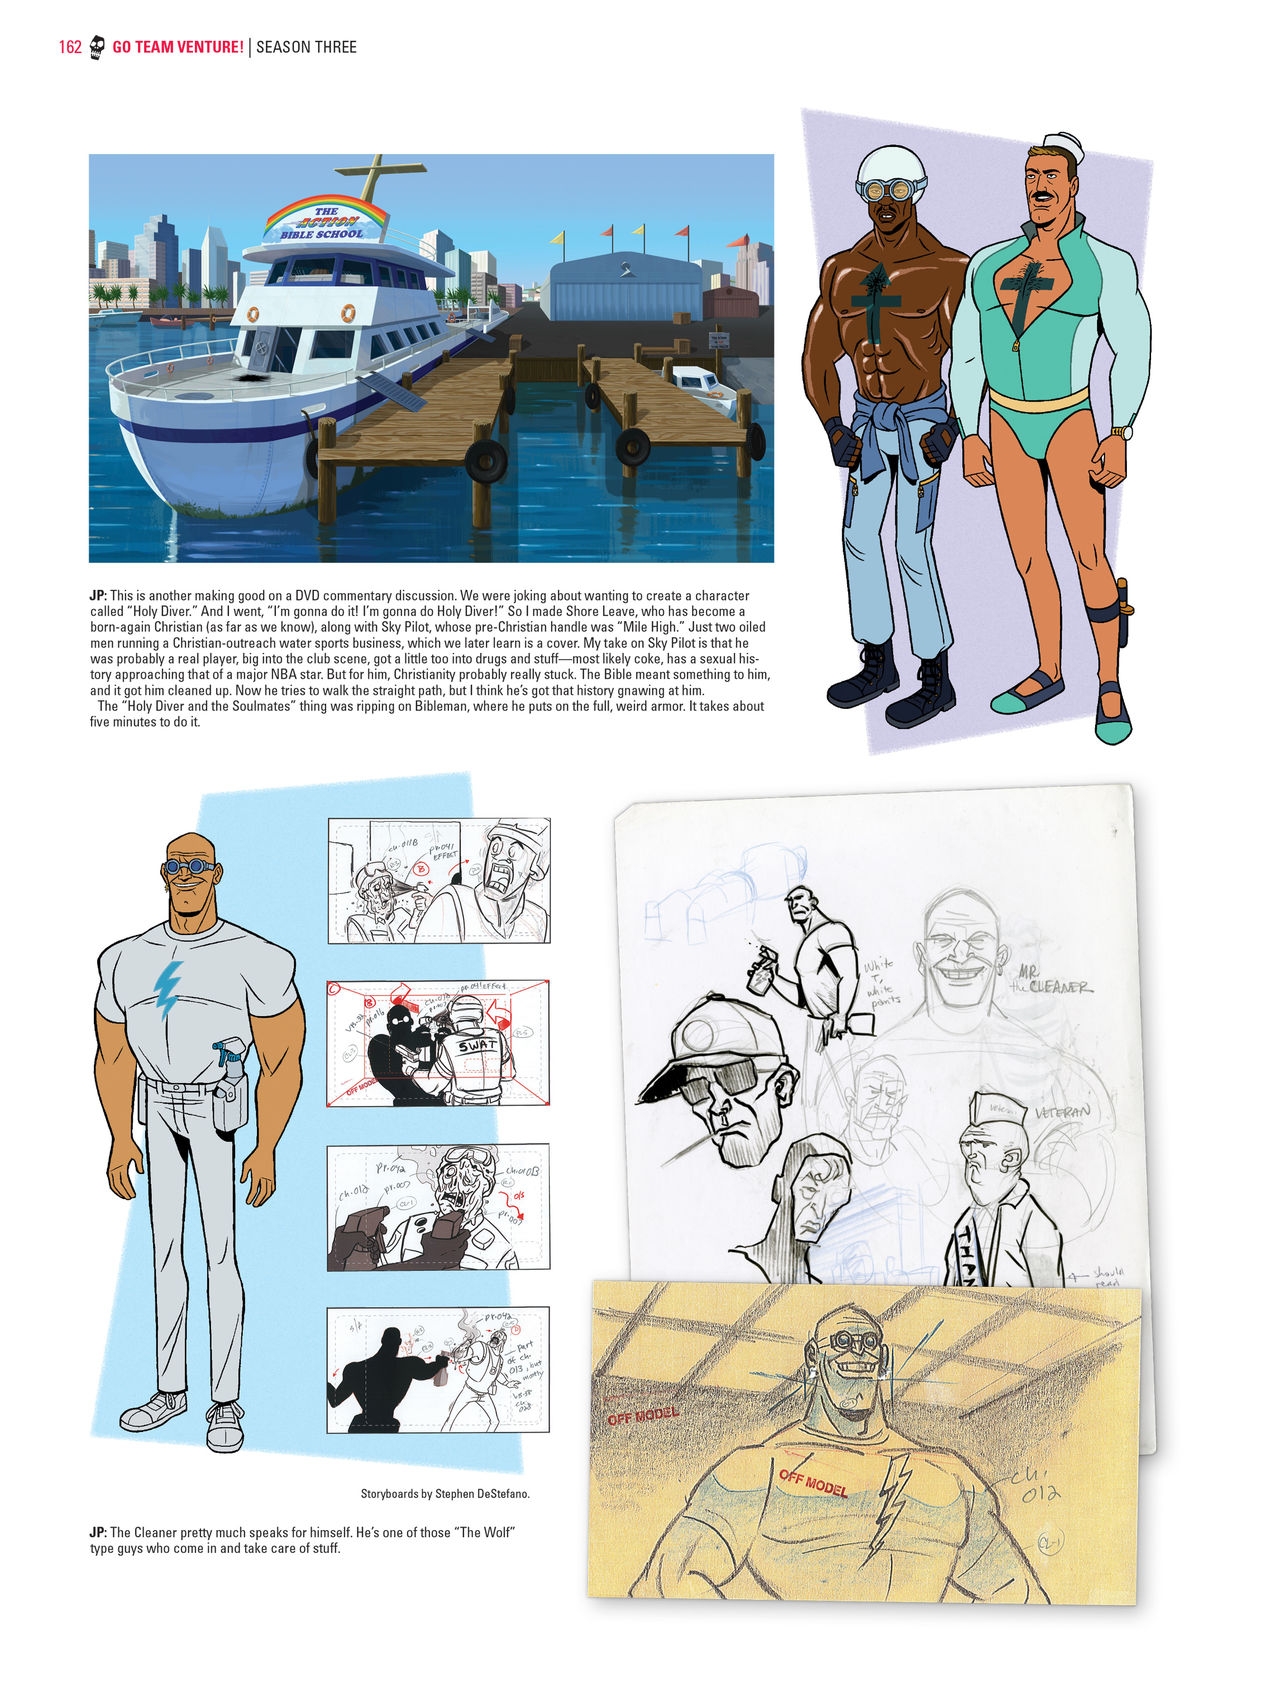 Go Team Venture! - The Art and Making of the Venture Bros 160